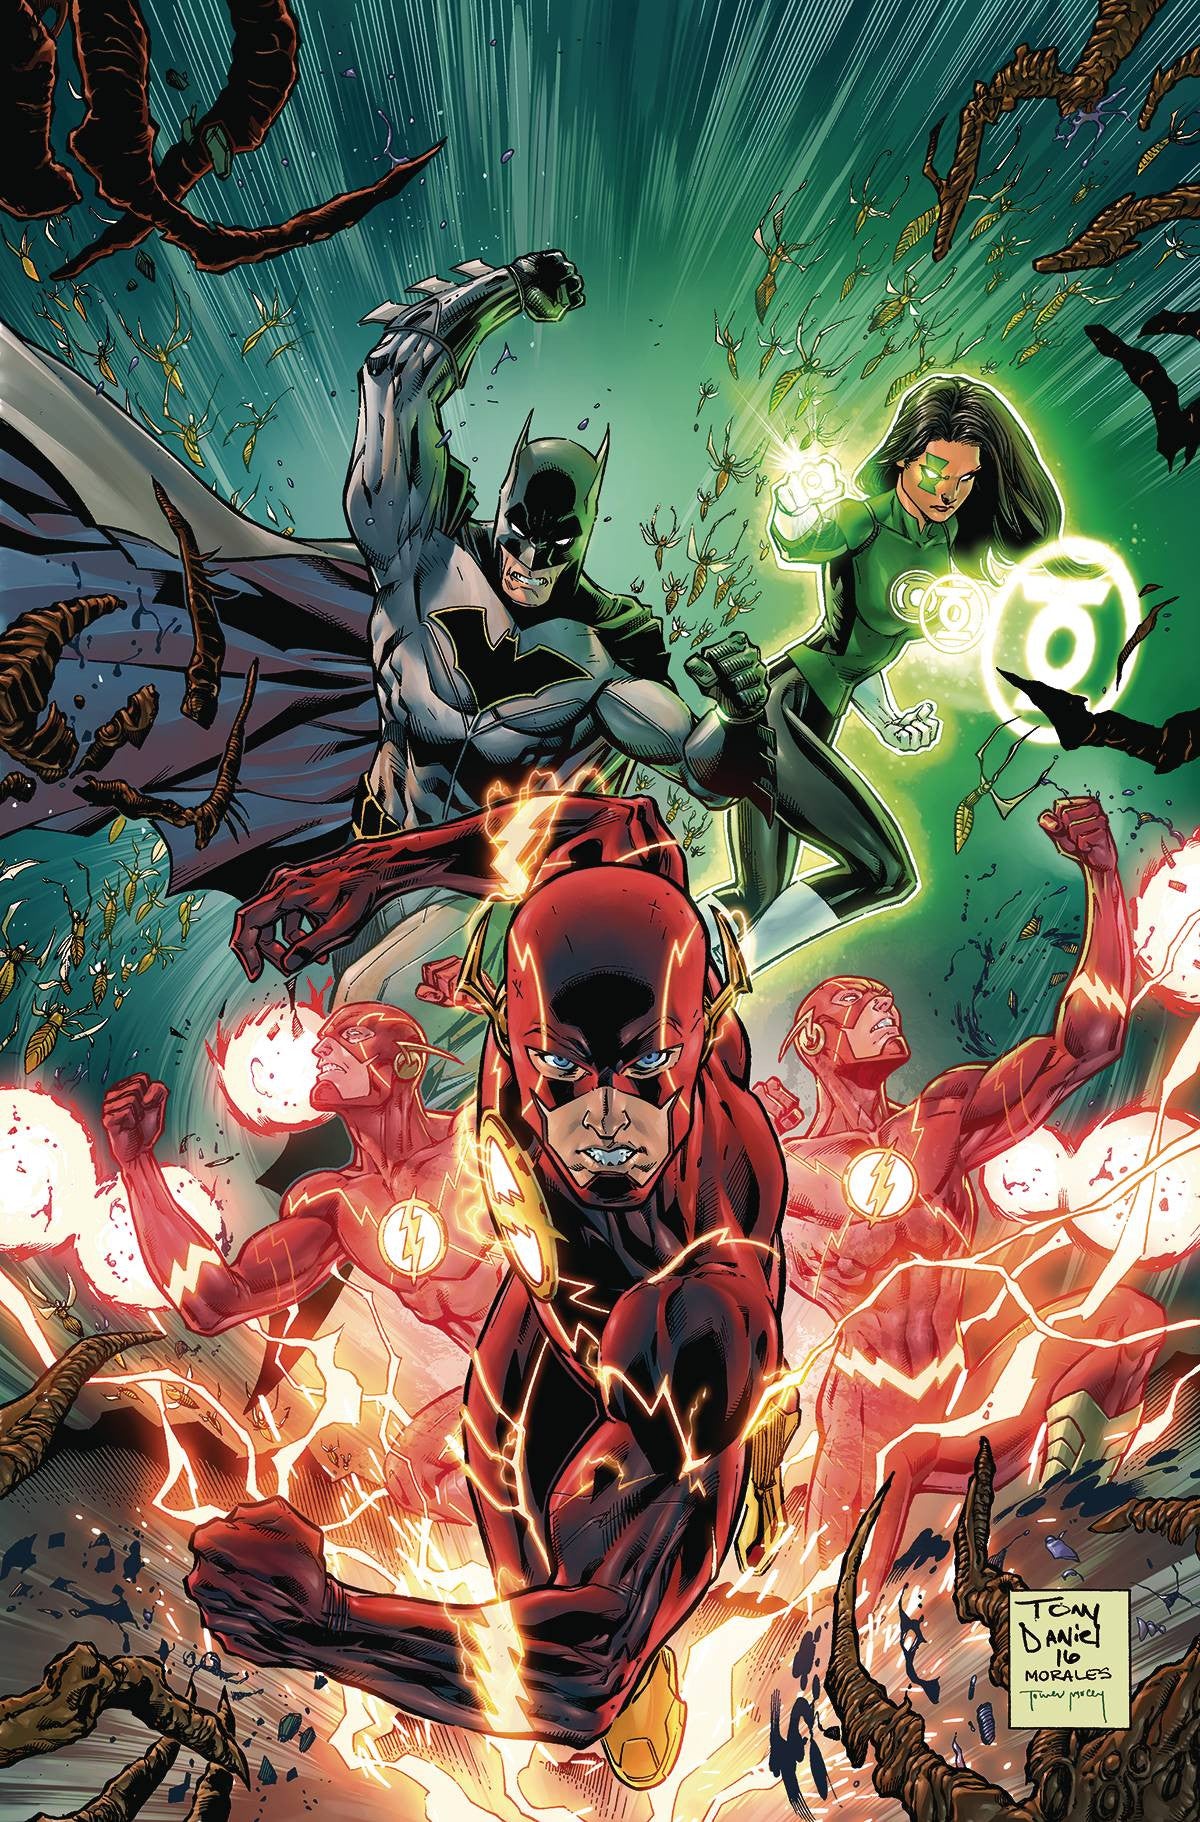 JUSTICE LEAGUE #2 COVER